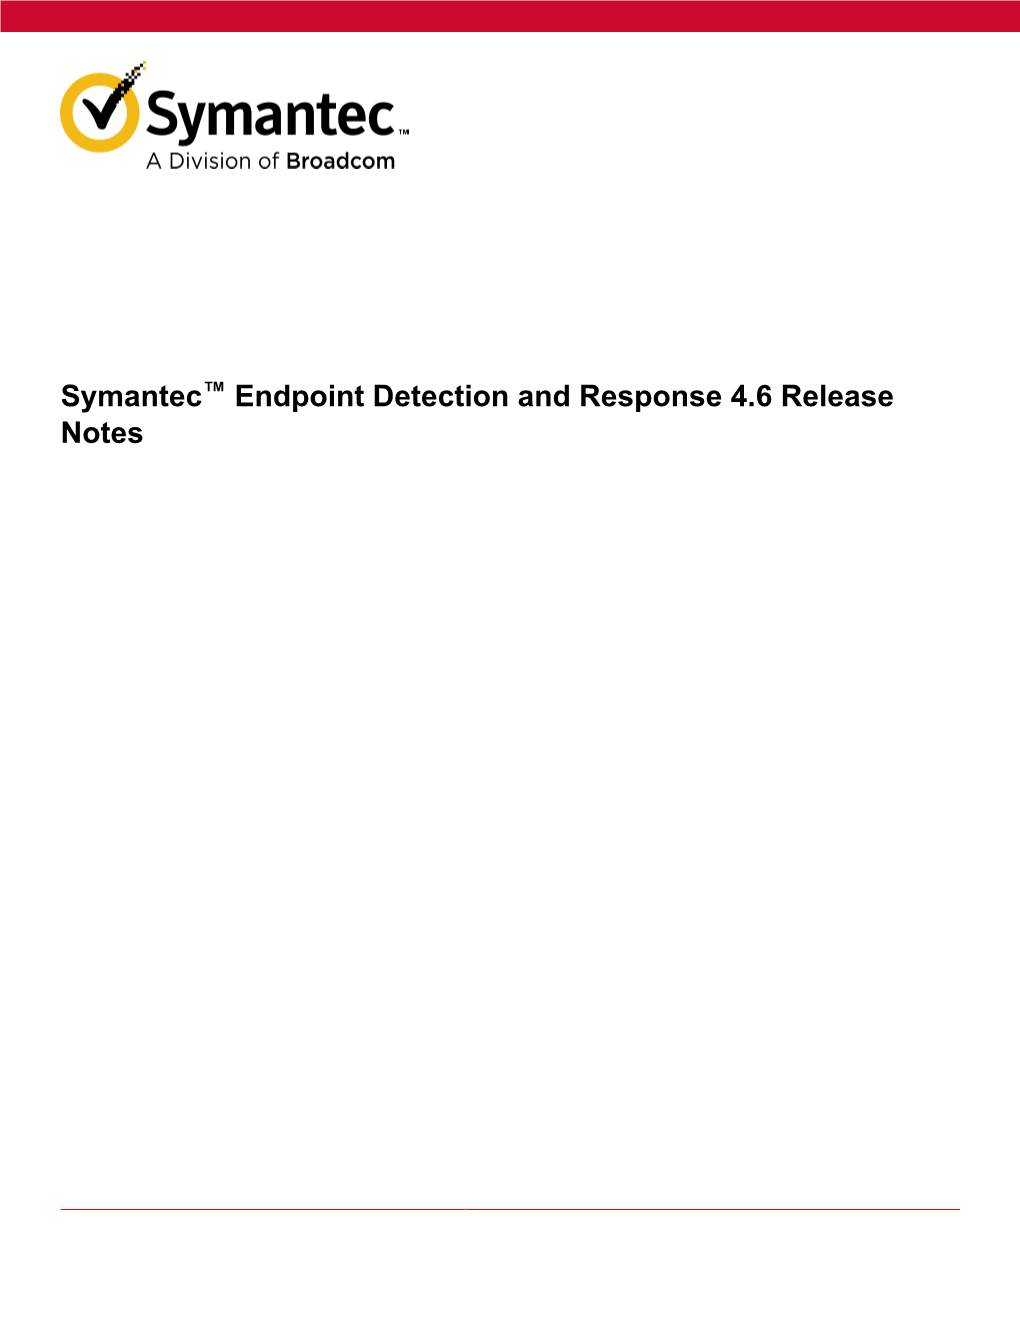 Symantec™ Endpoint Detection and Response 4.6 Release Notes